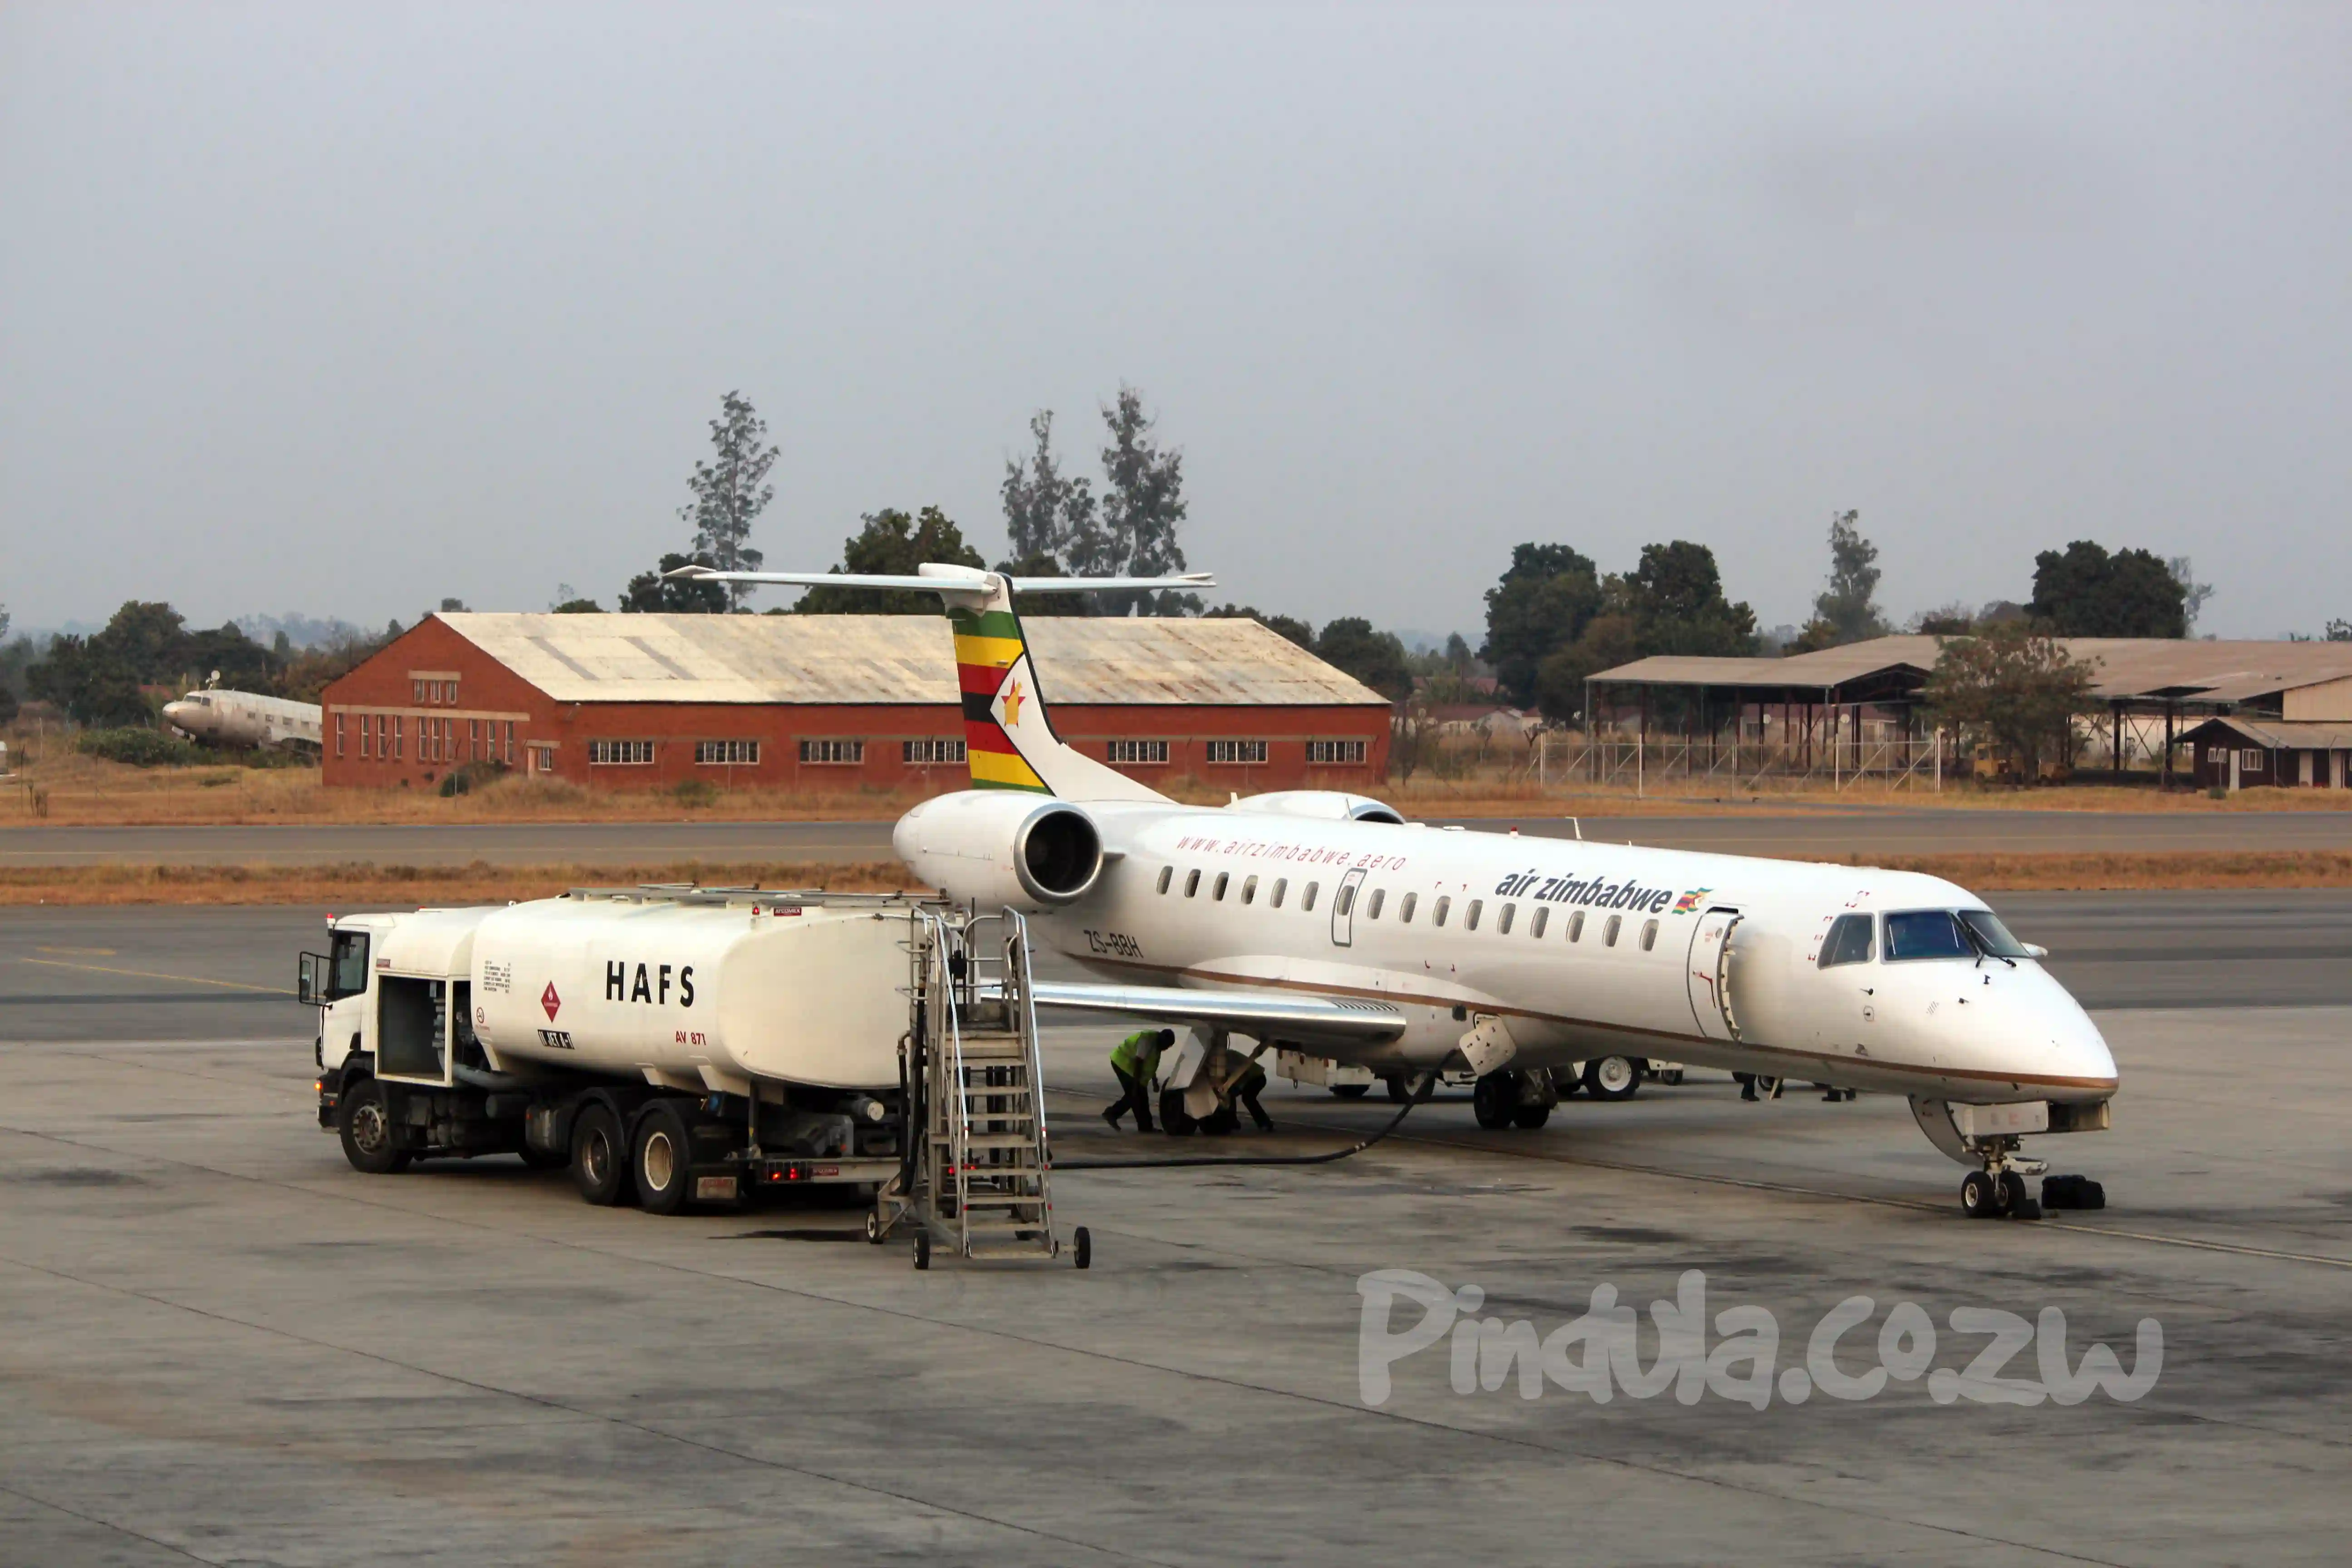 South Africa grounds all Air Zimbabwe planes - no landing or take off, Zim set to hit back